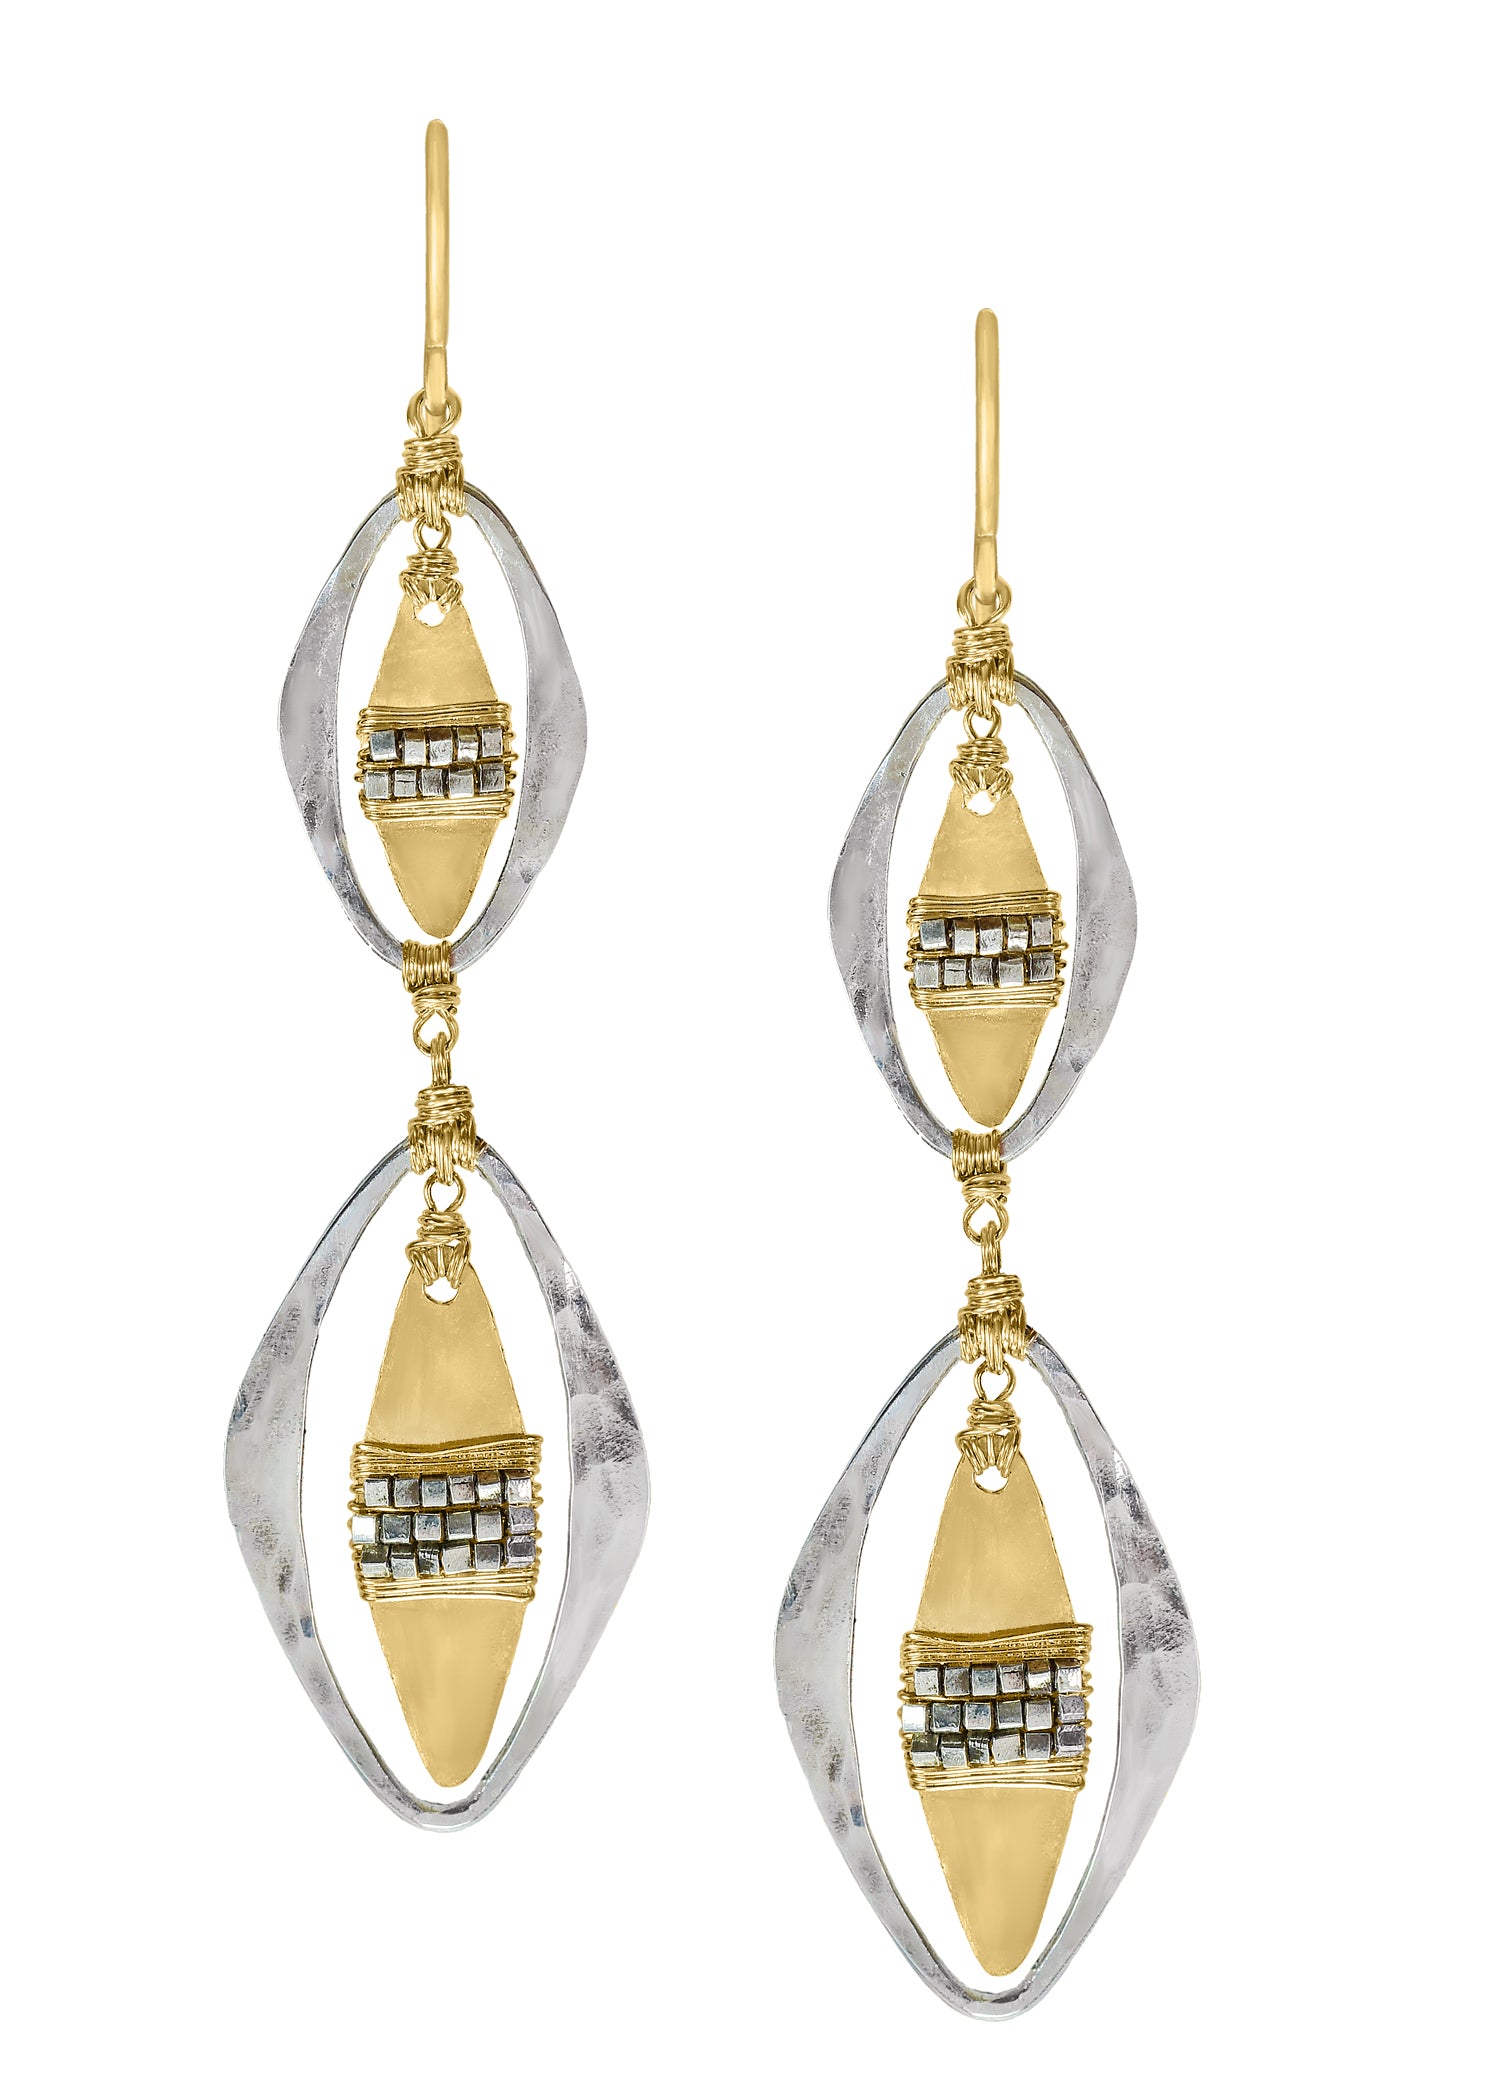 14k gold fill Sterling silver Mixed metal Earrings measure 2-1/2" in length (including the ear wires) and 5/8" in width at the widest point Handmade in our Los Angeles studio